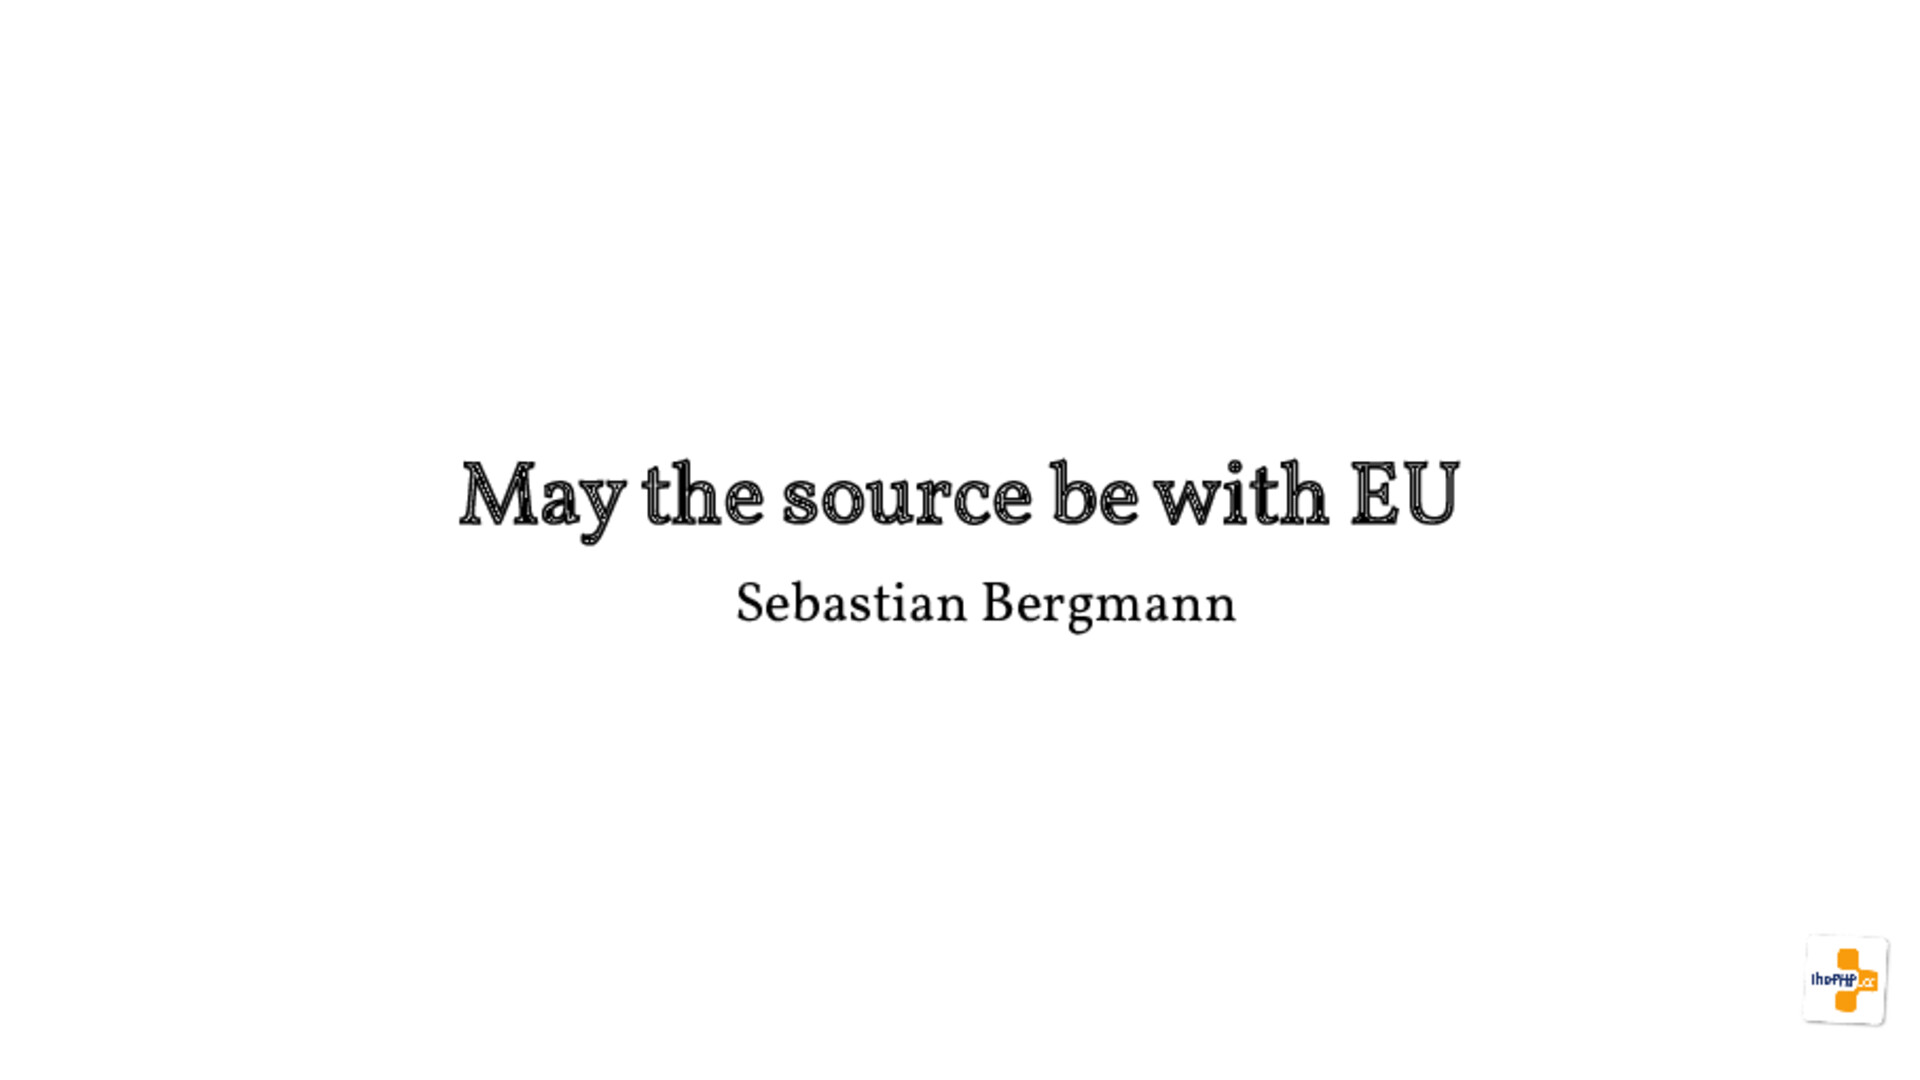 May the source be with EU